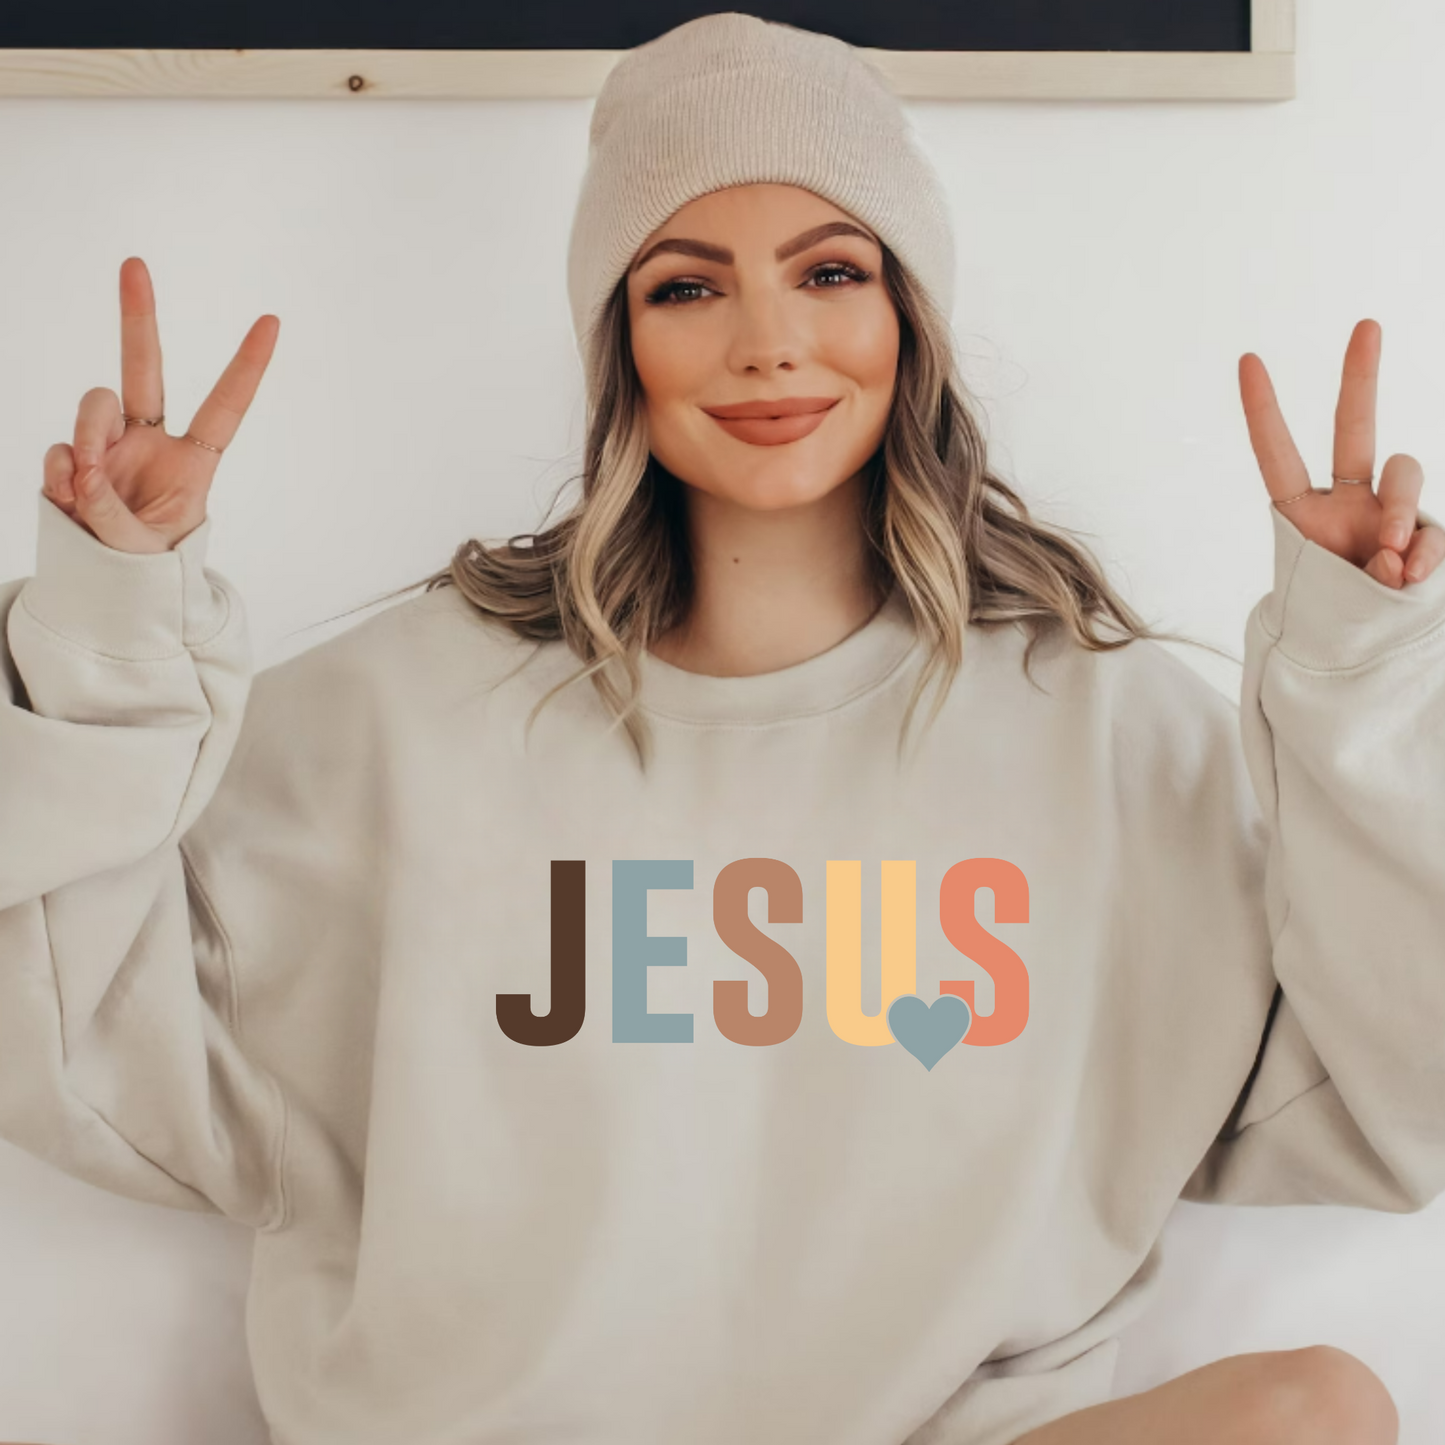 (Shirt not included) JESUS - Clear Film Transfer